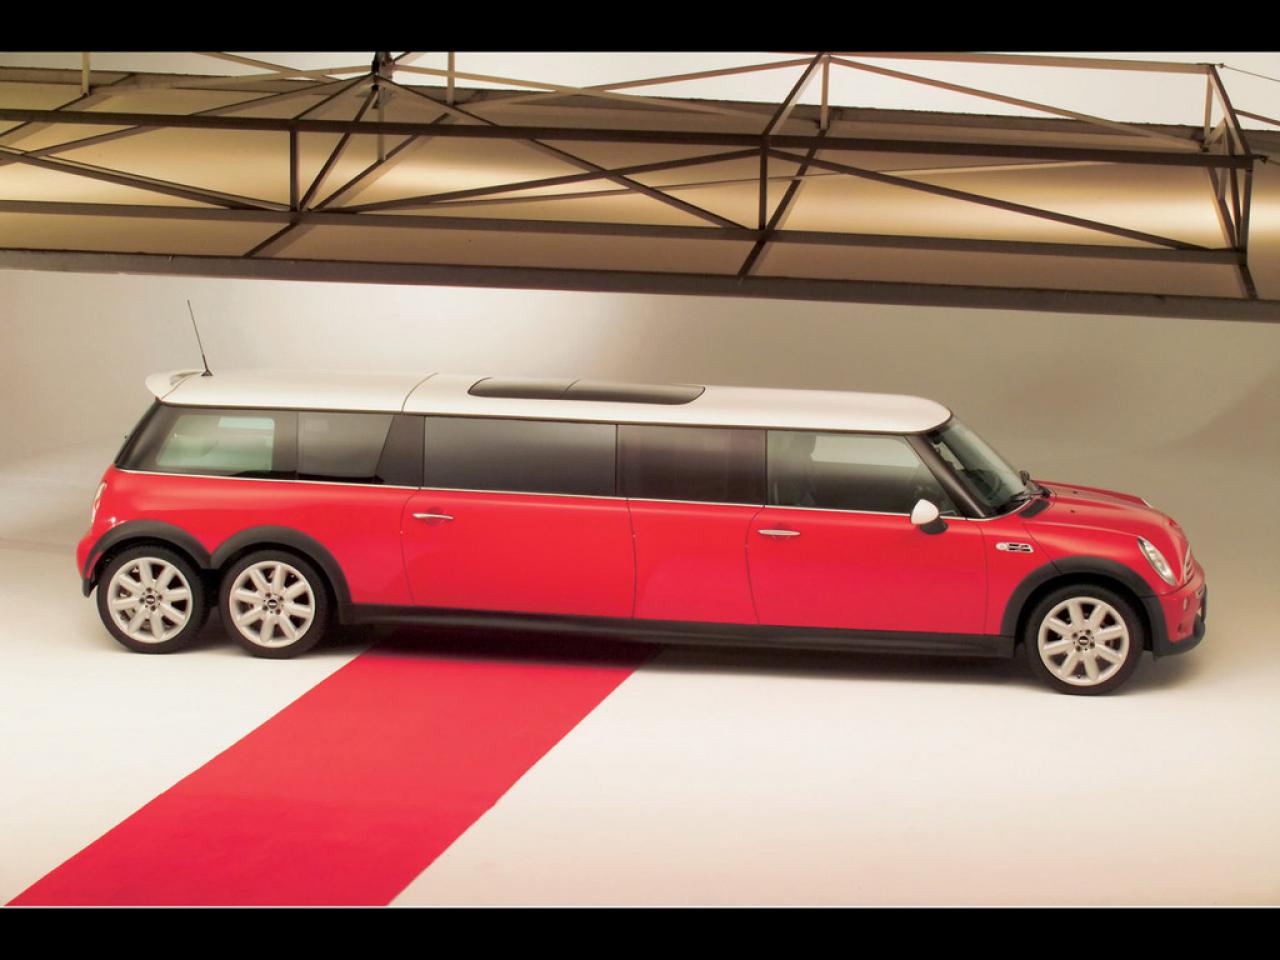 Mini XXL Stretch Limo Review, Video, Specification, Price, Pictures